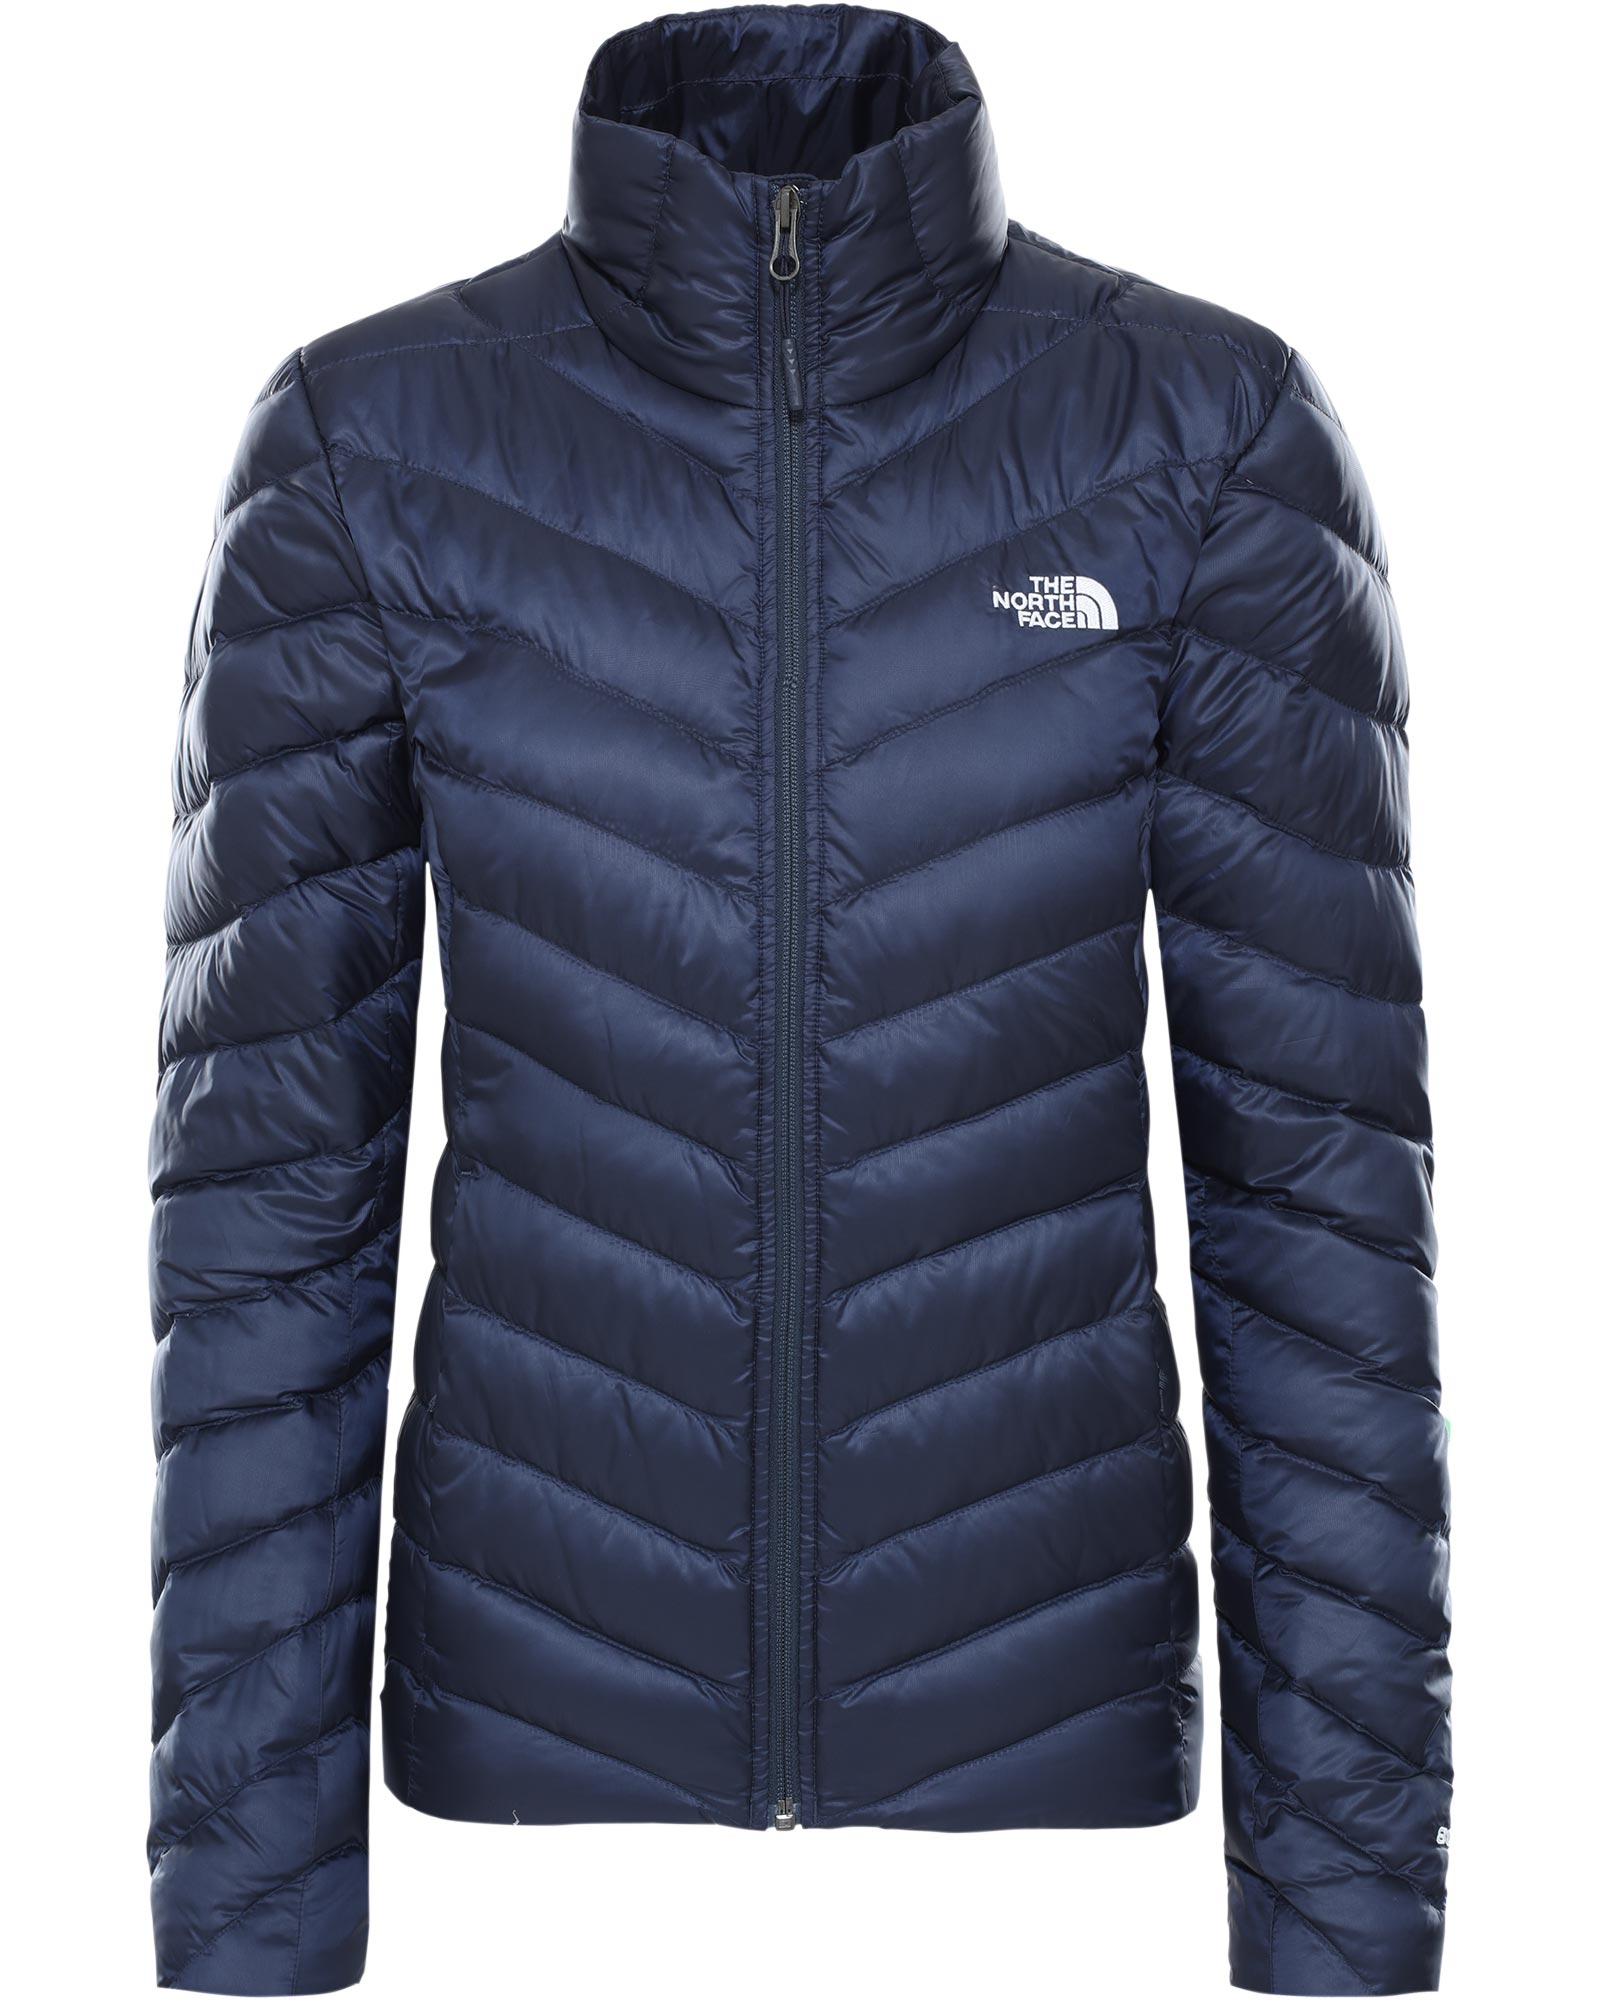 The North Face Trevail Women’s Jacket - Urban Navy XS